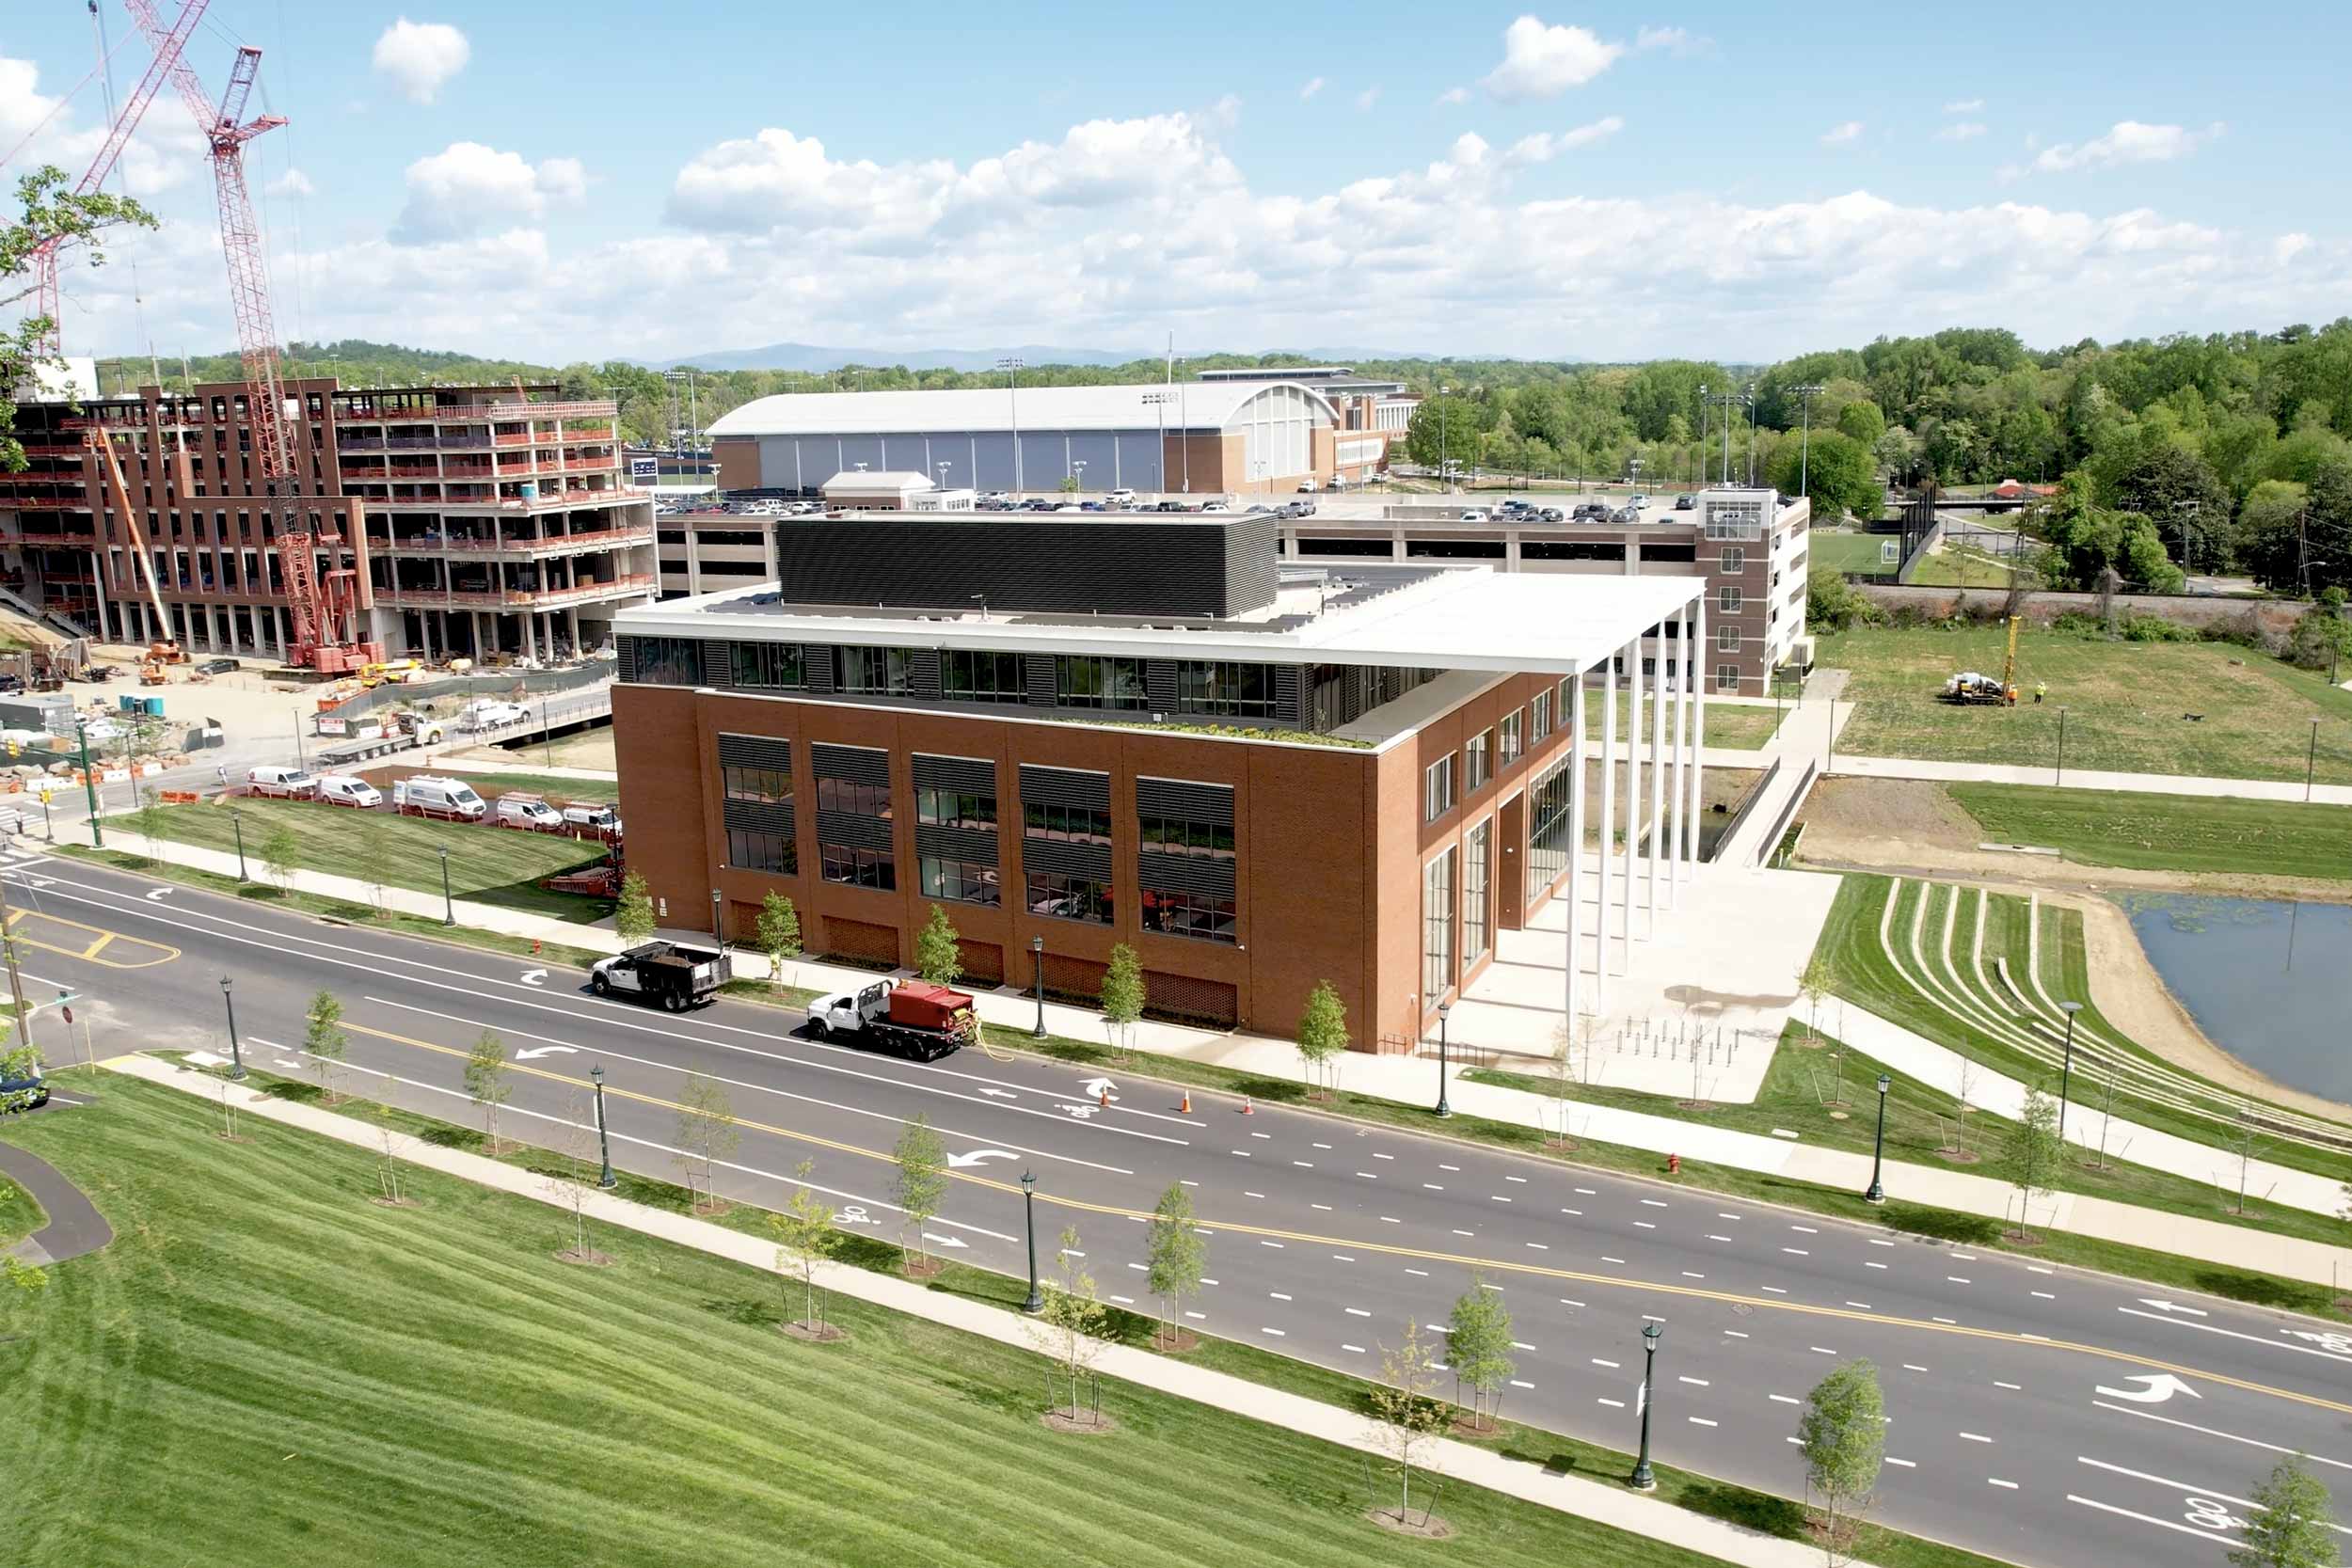 The new data science building embodies the school's core values